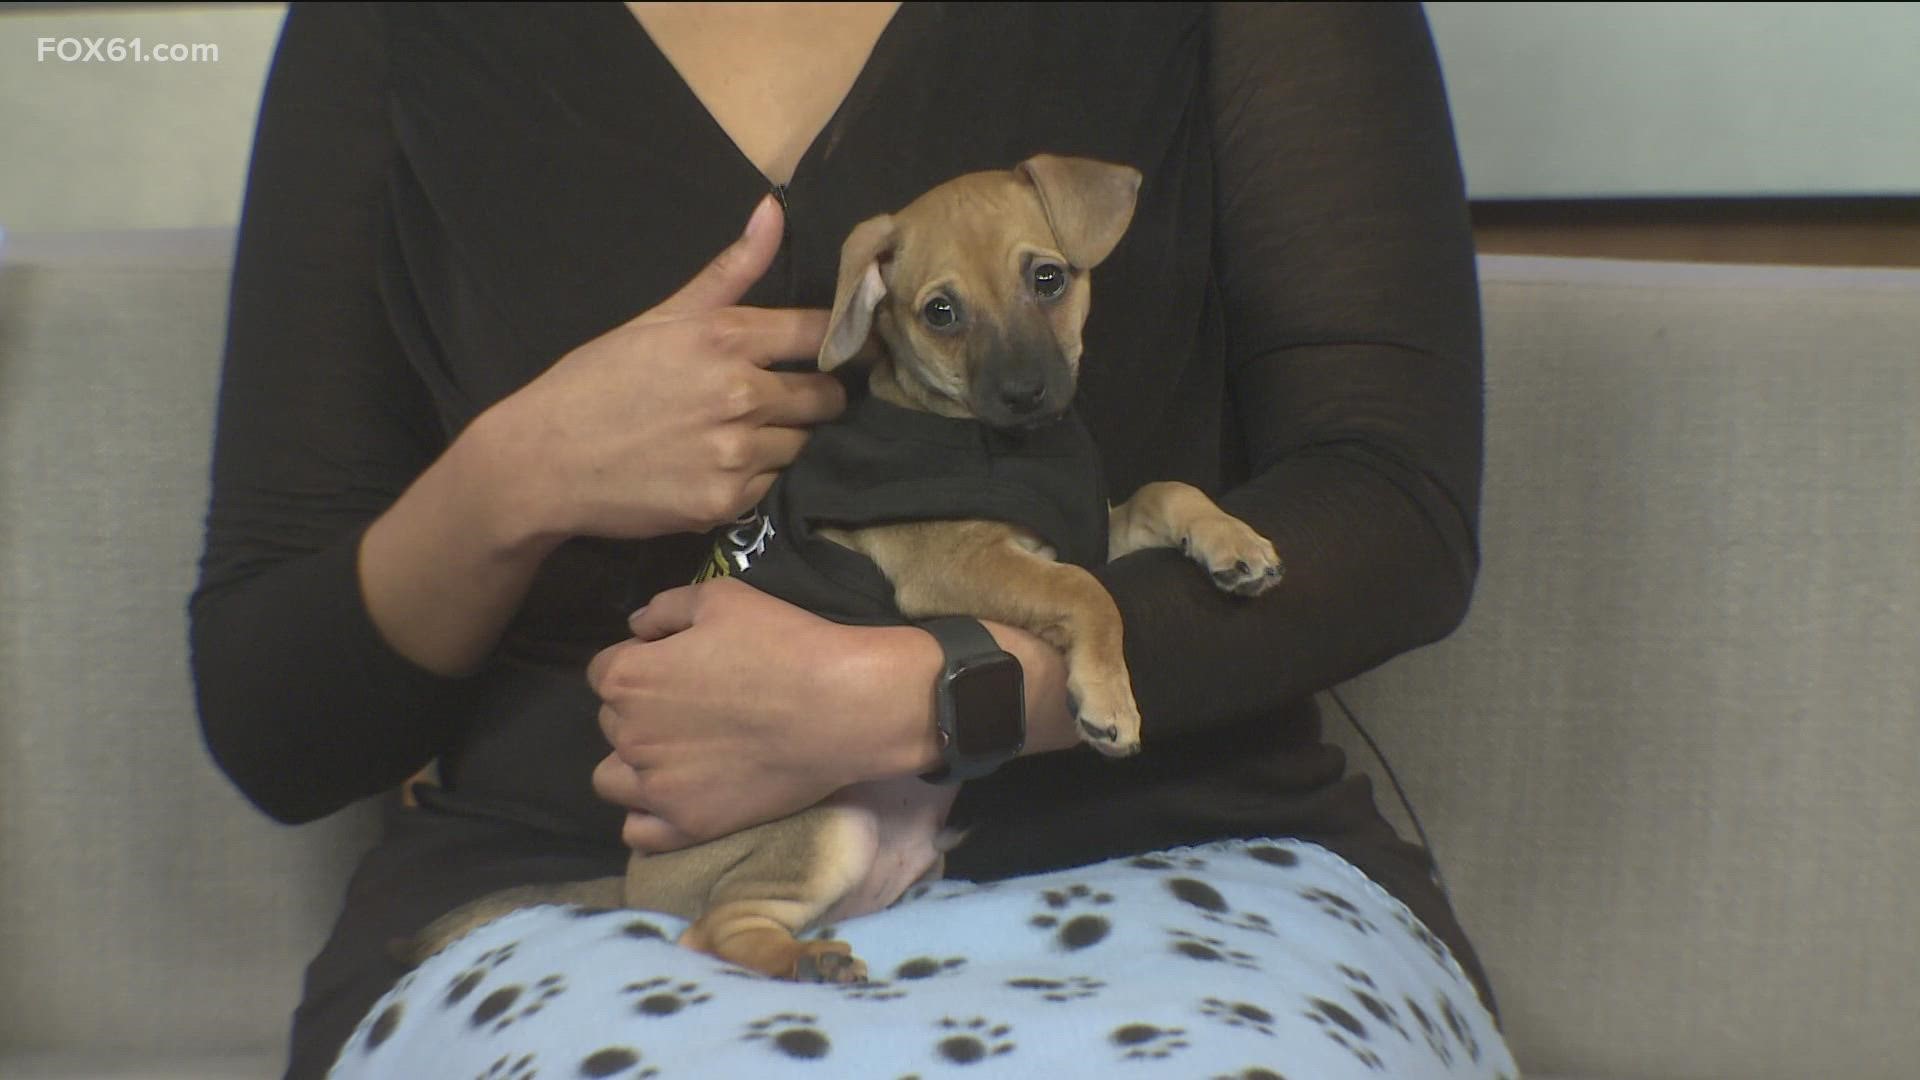 Mufasa is a two-month-old puppy at the Connecticut humane society looking for a forever home.